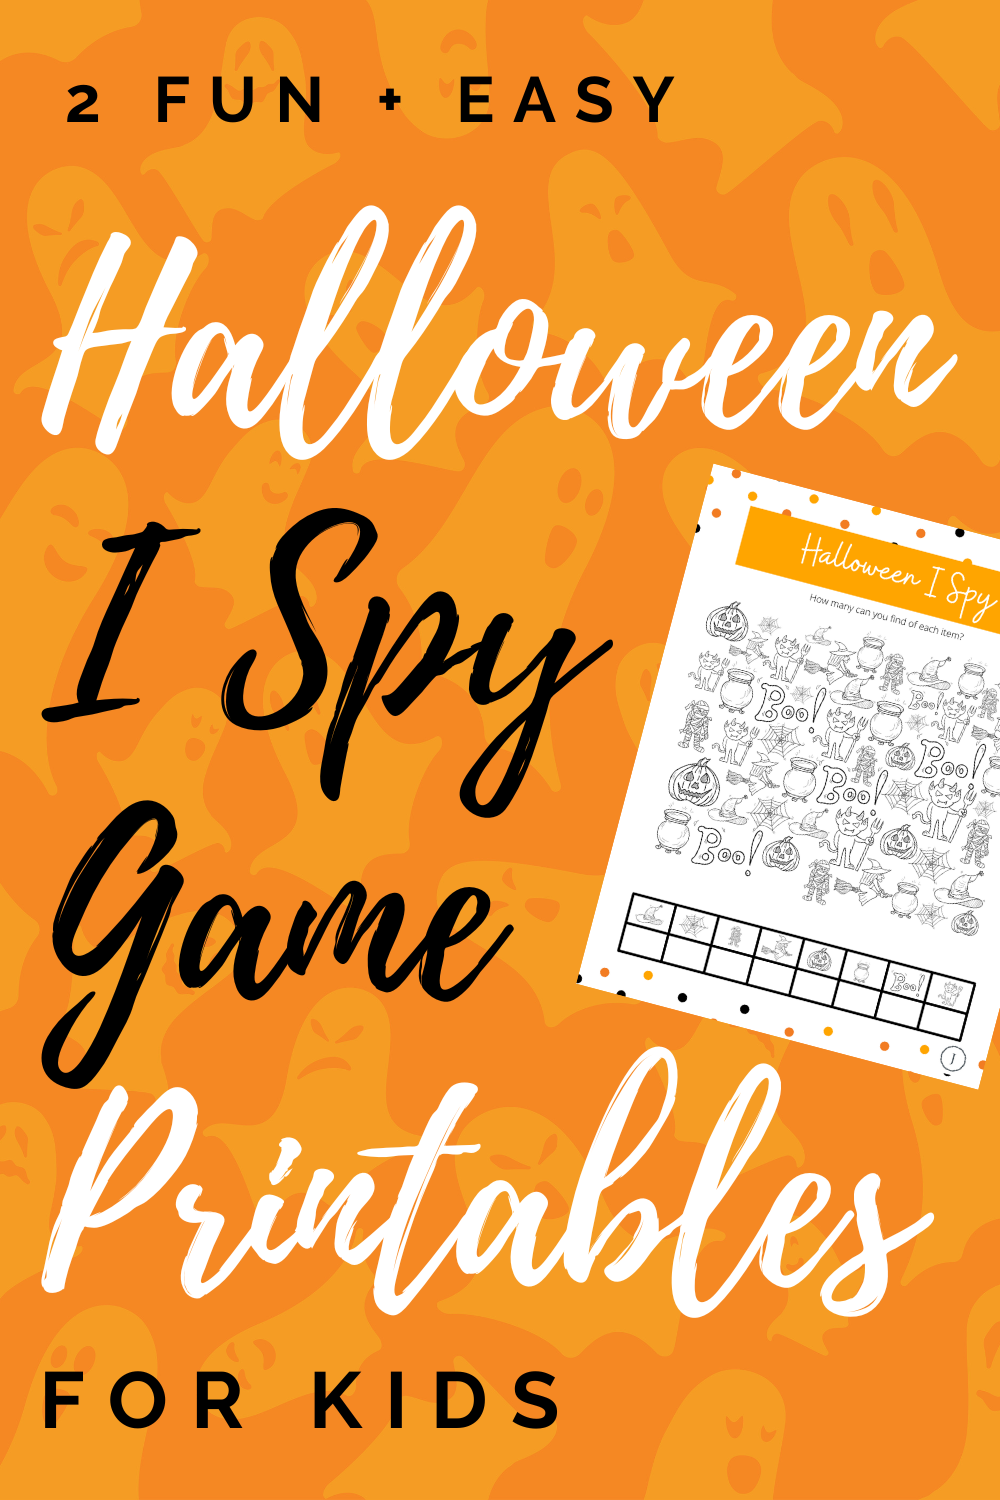 Halloween I Spy Games: 2 Fun and Free Printables for Kids